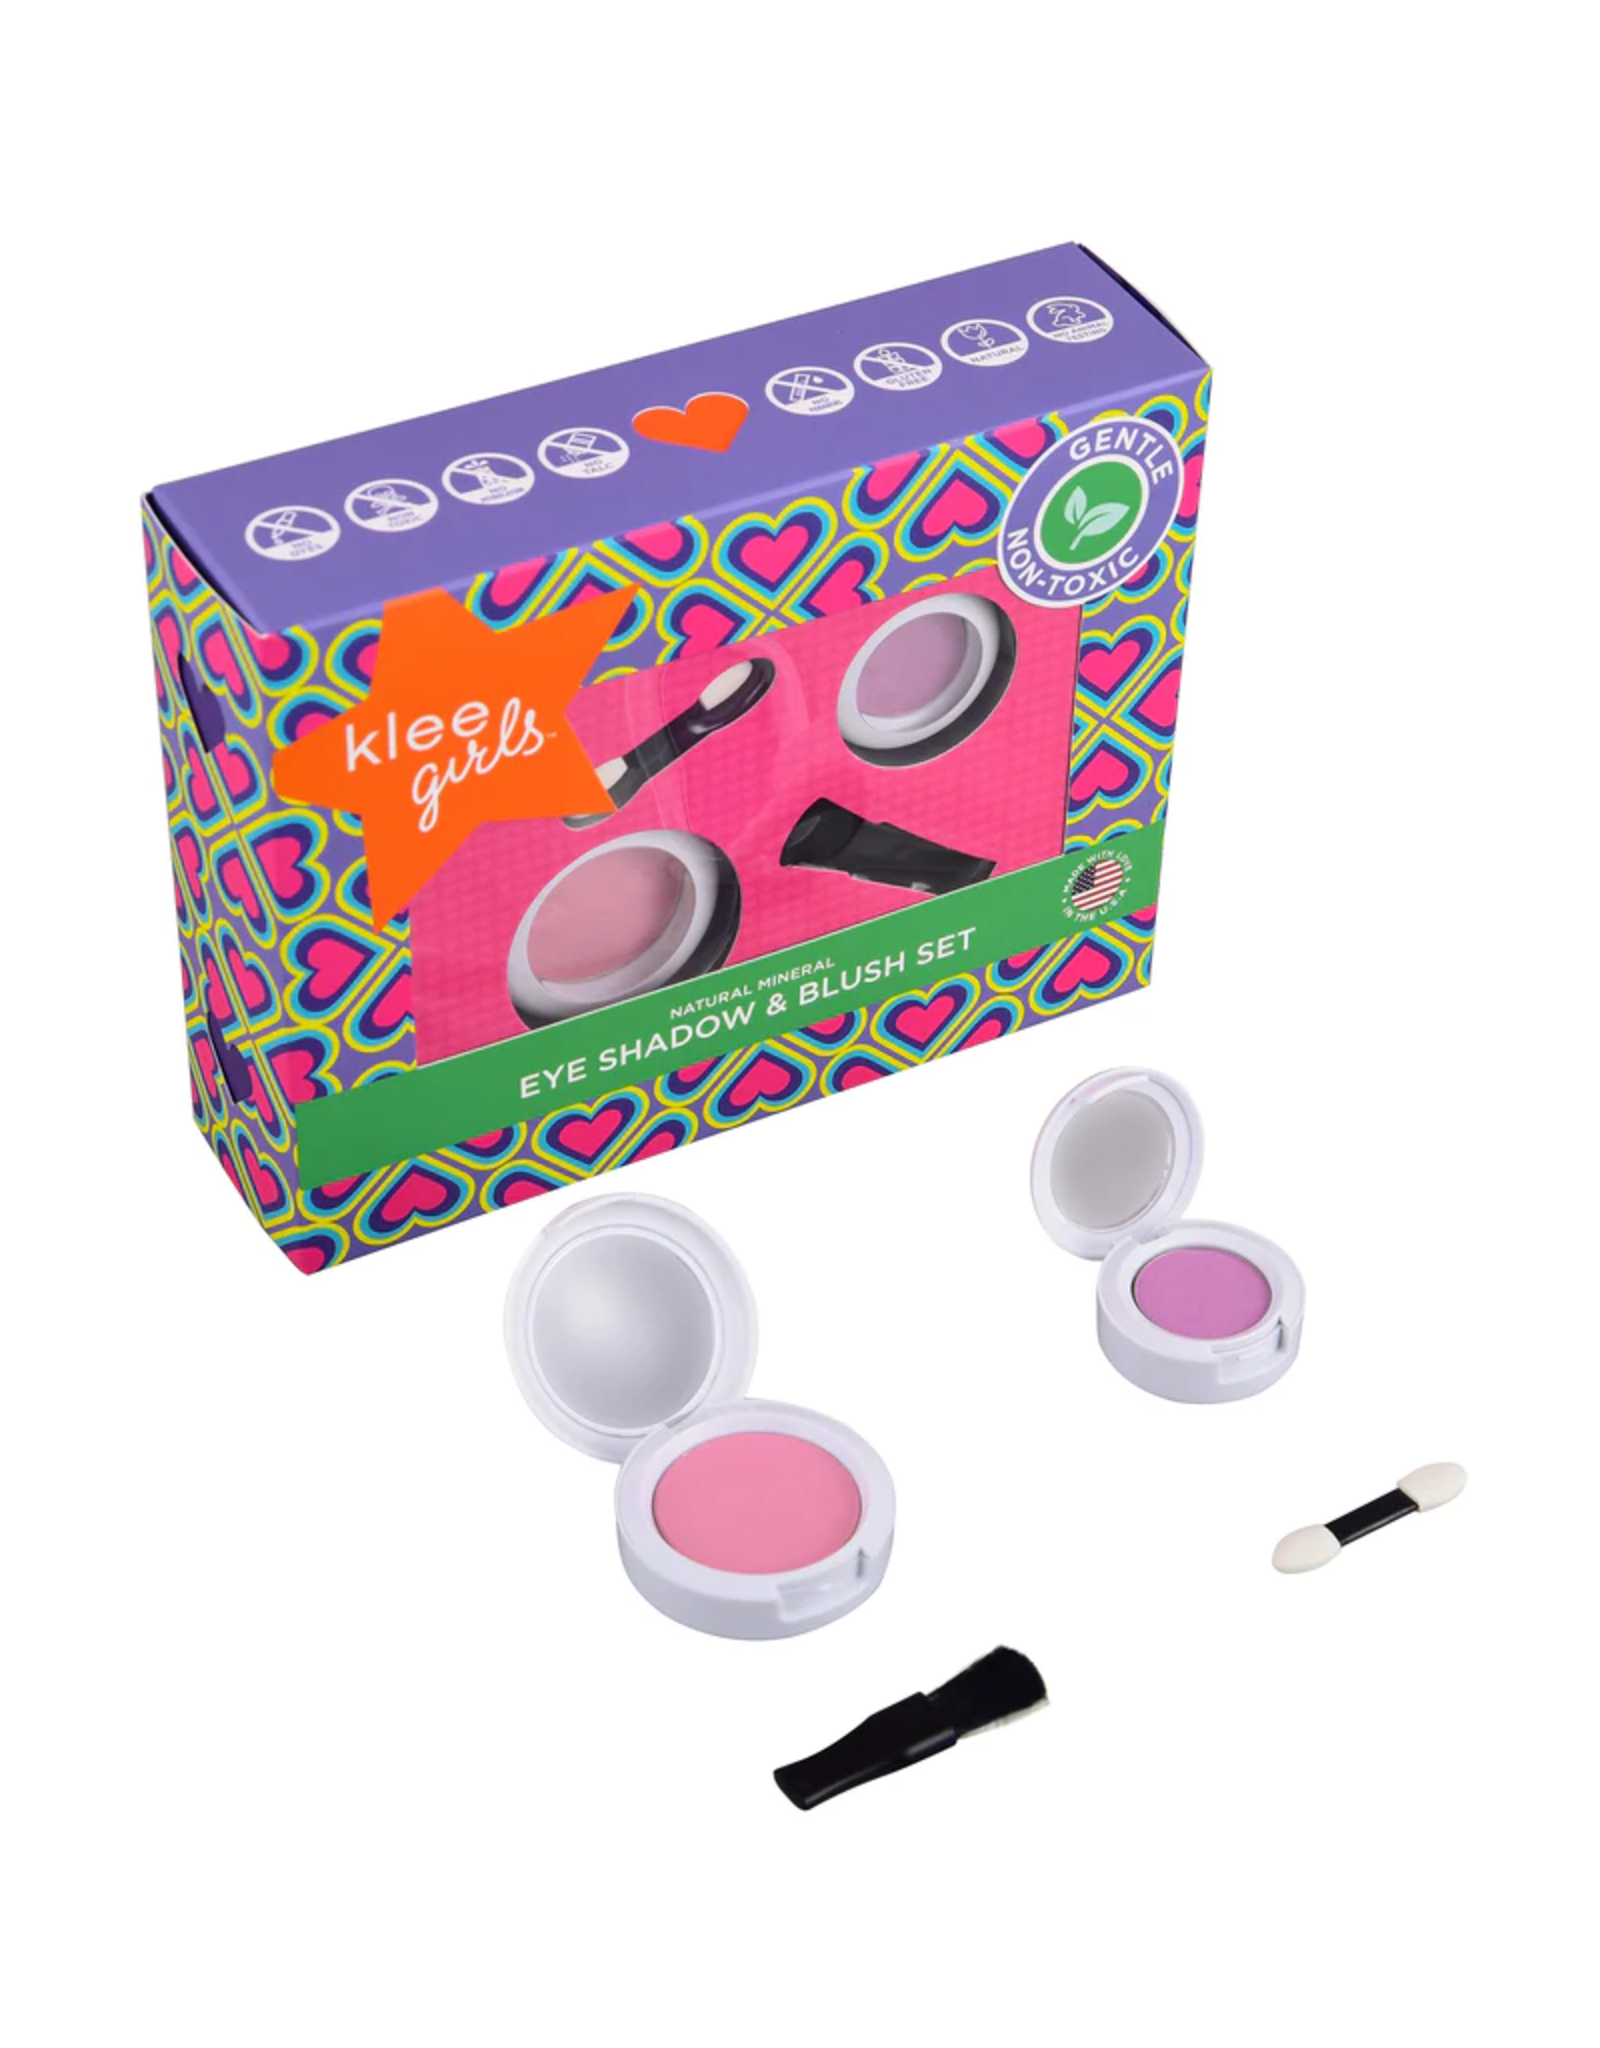 Klee Naturals Girls Eyeshadow and Blush 2 pc Set-Whisper and Dream